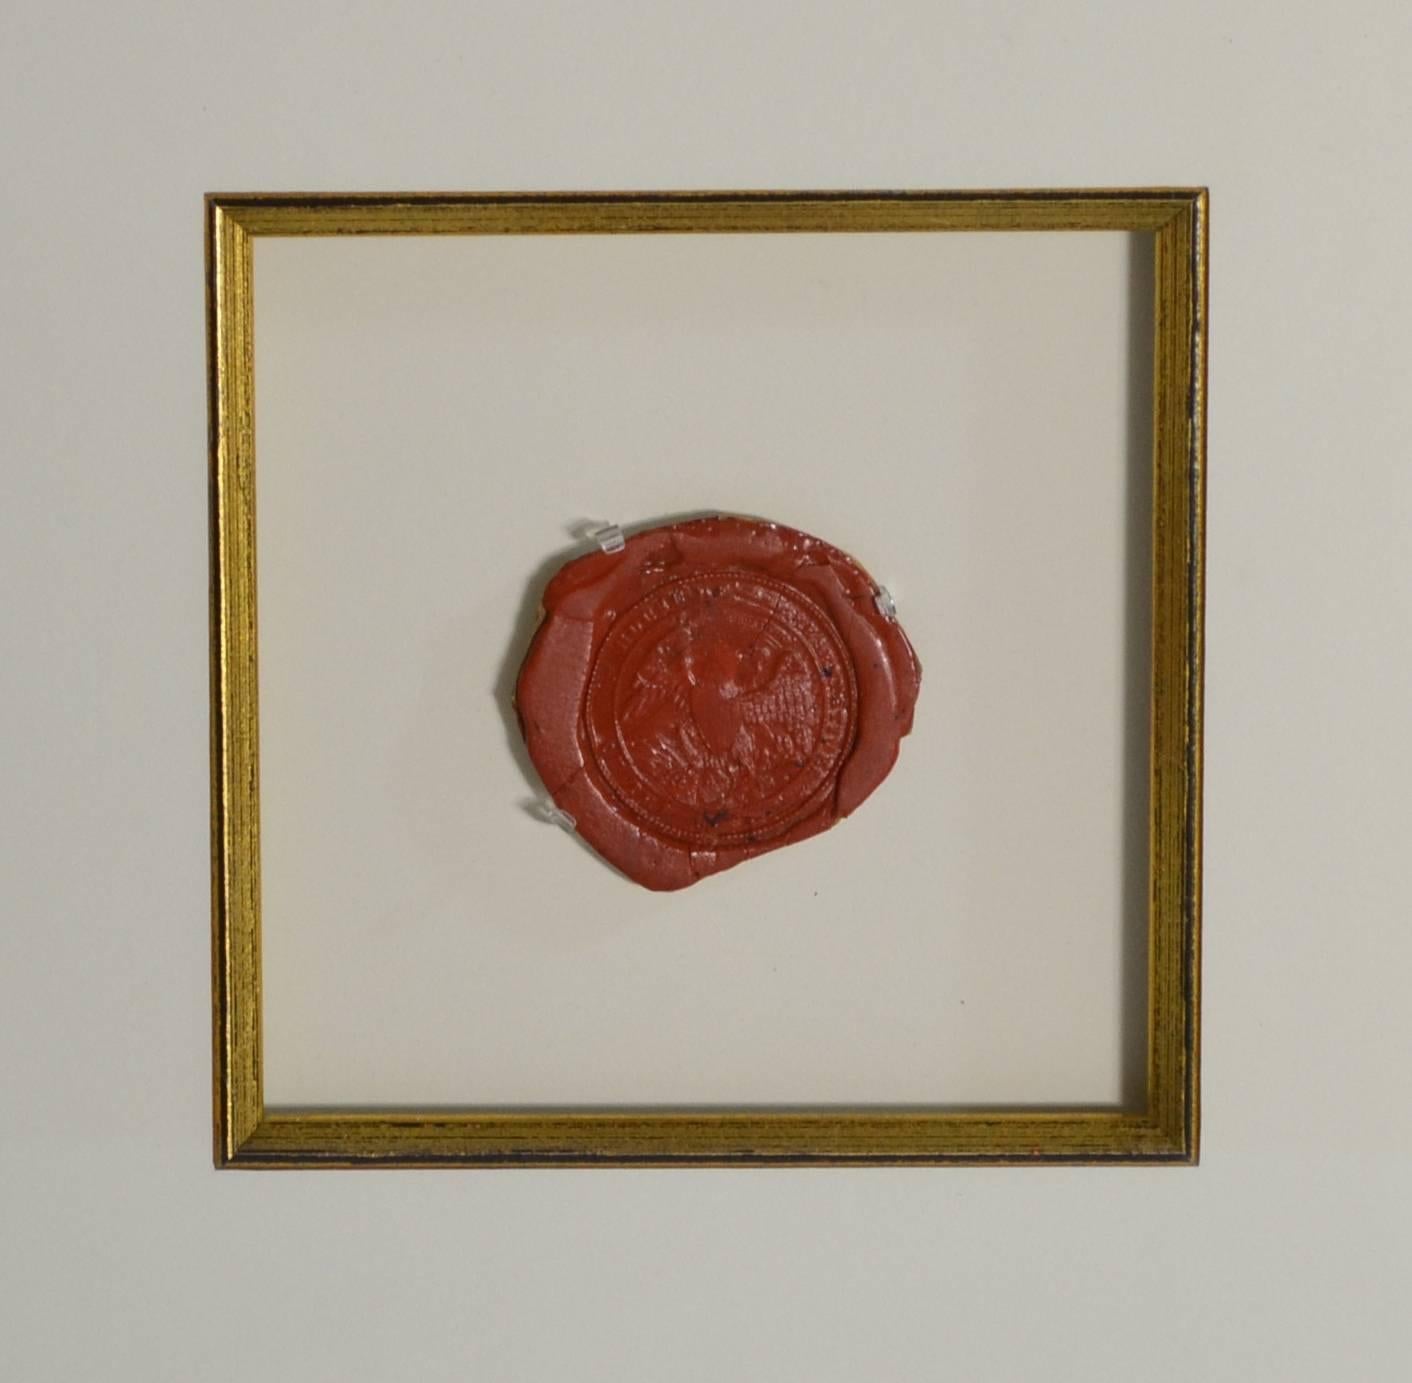 Rare antique United States Presidential wax seal
red wax document seal, circa mid-1800s based on the style used at the time
rare antique U.S. Presidential red wax document seal, circa mid-1800s
It reads;
Seal for the President of the United